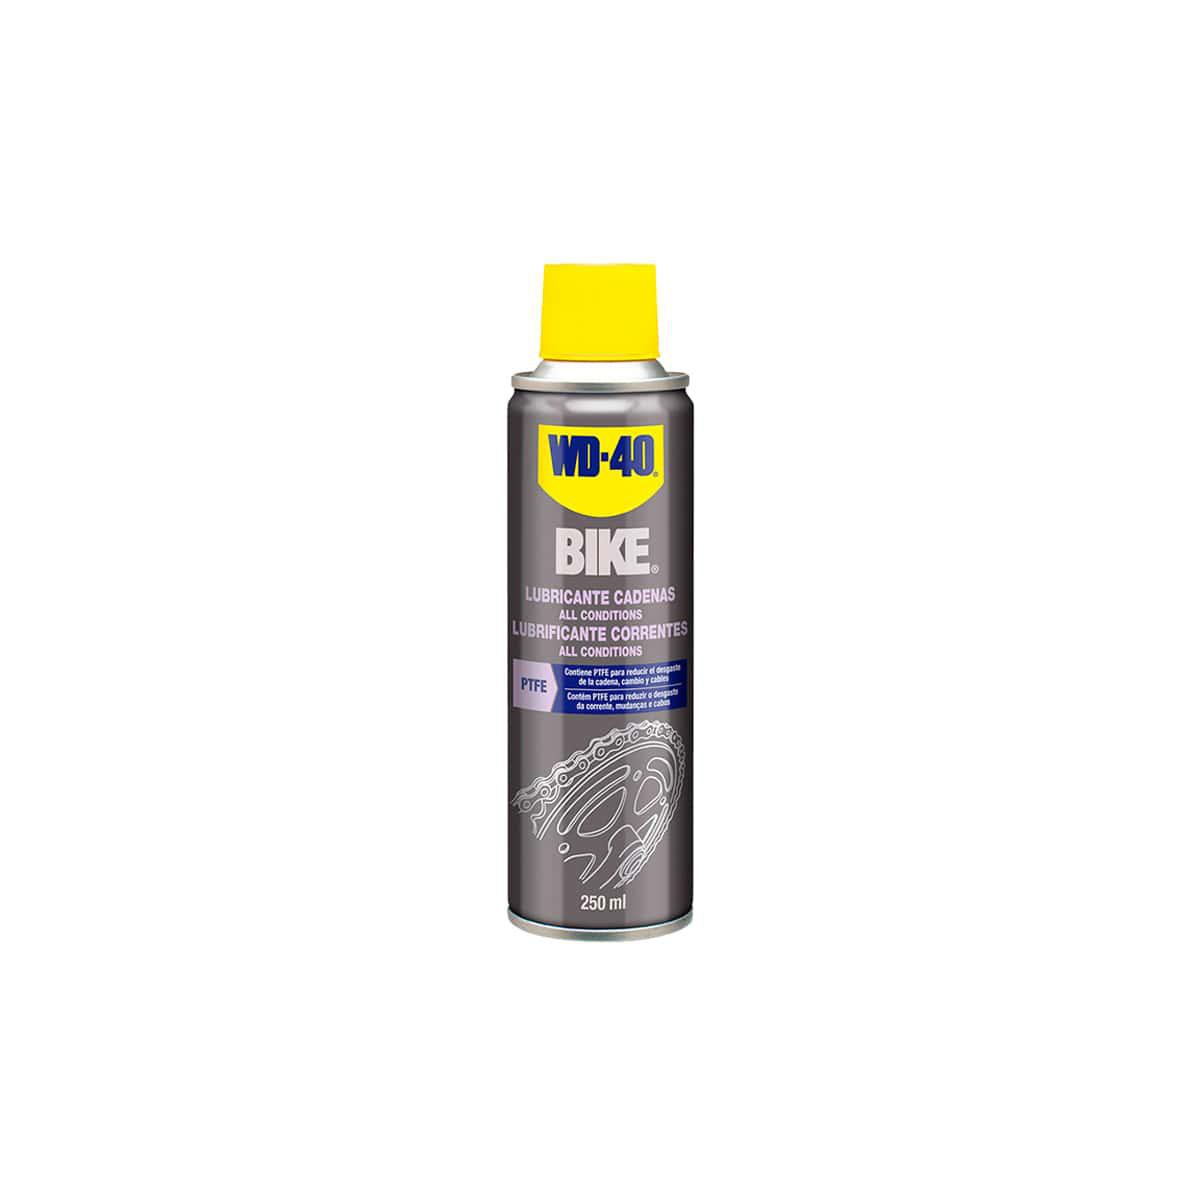 Wd40 - Lubrifiant WD40 toutes conditions spray 250ml - Mastic, silicone, joint